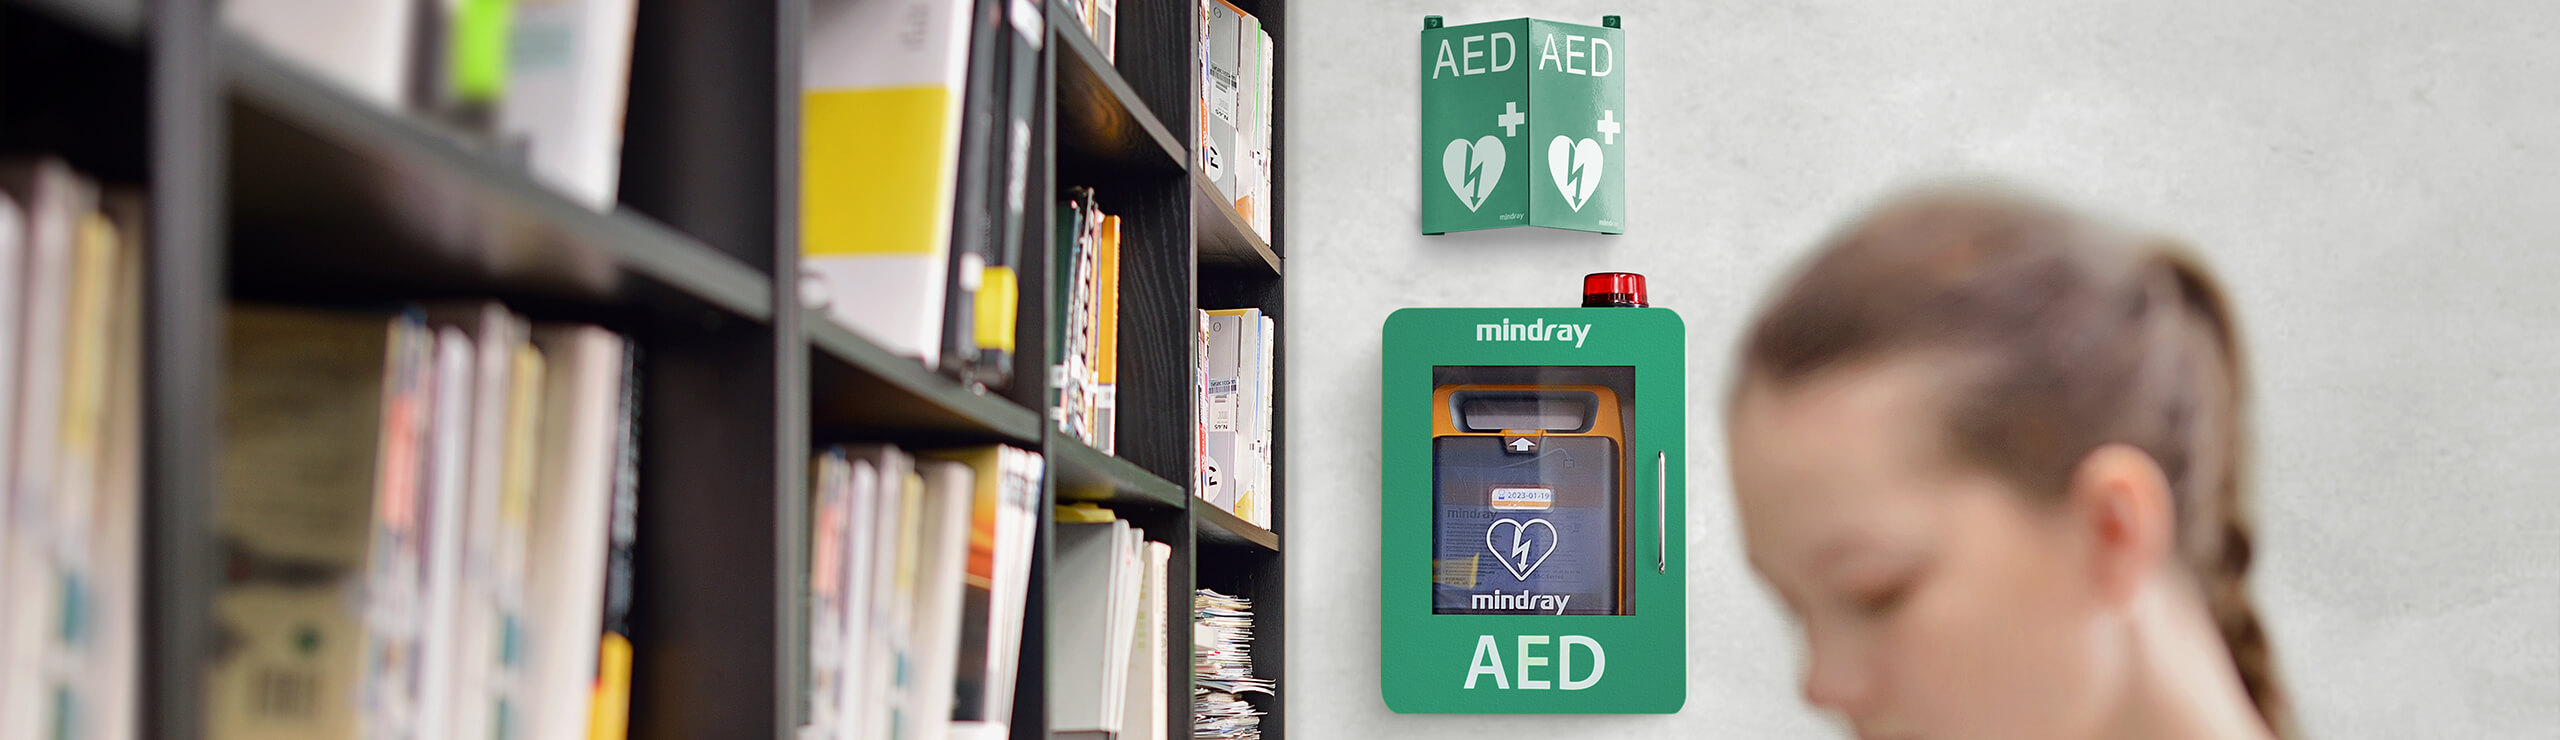 AED in public library